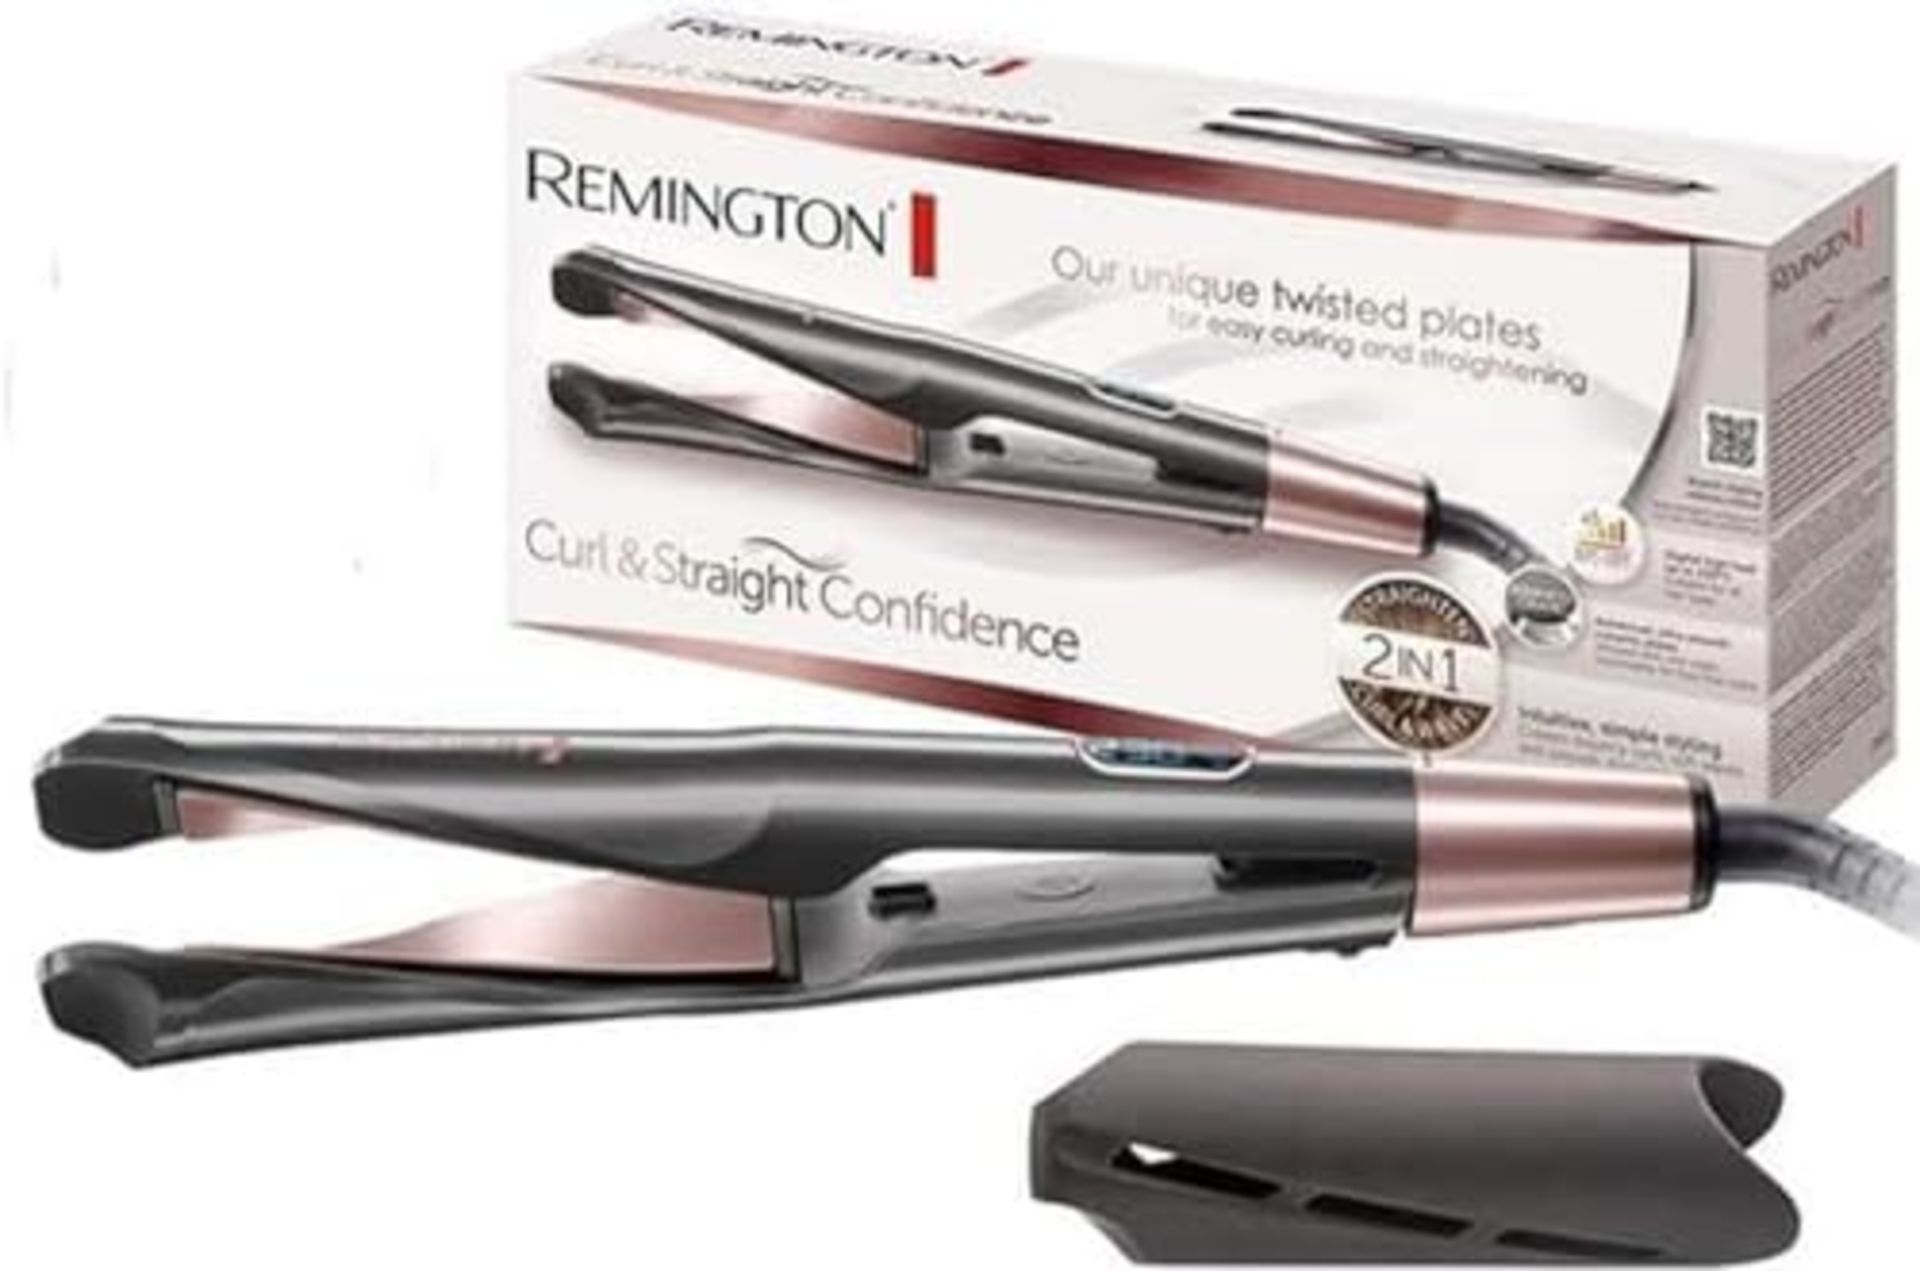 RRP £57.00 Remington Straightener & Curling Wand - Curl&Straight Confidence 2in1 Multistyler [Upg